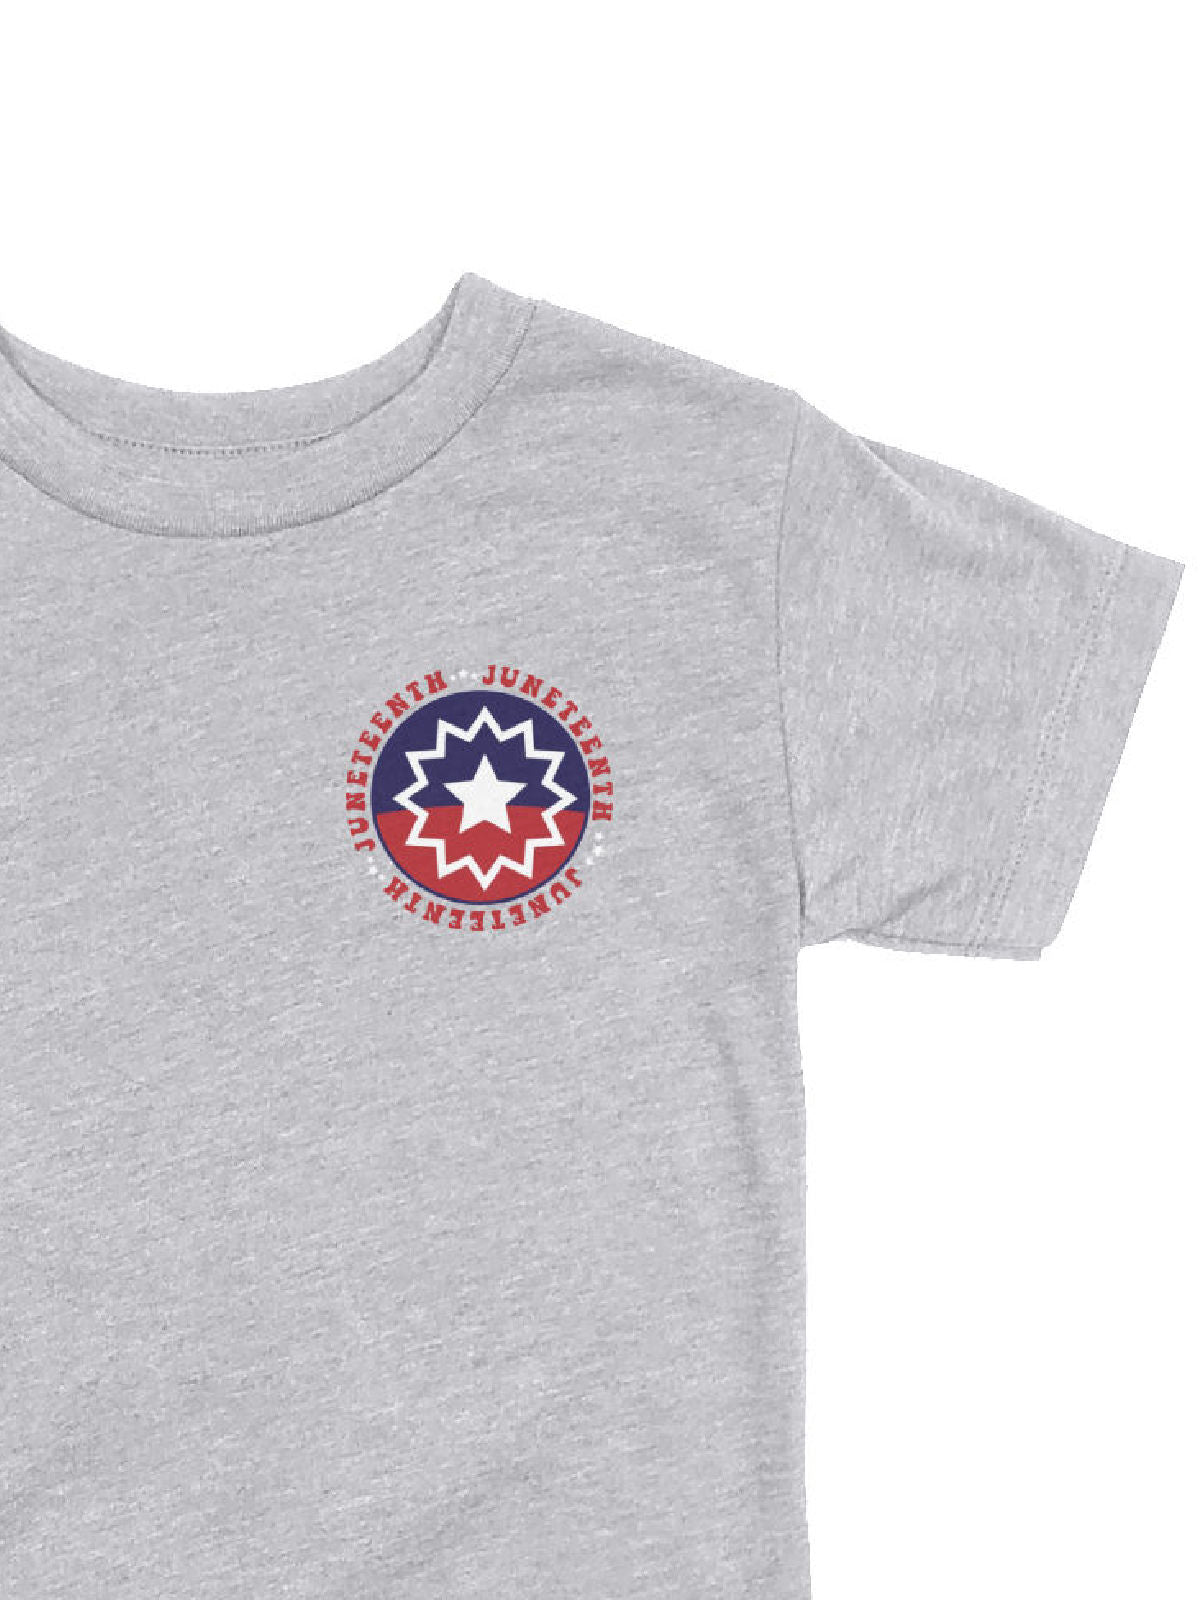 Juneteenth Flag Shirt for Kids in Heather Gray